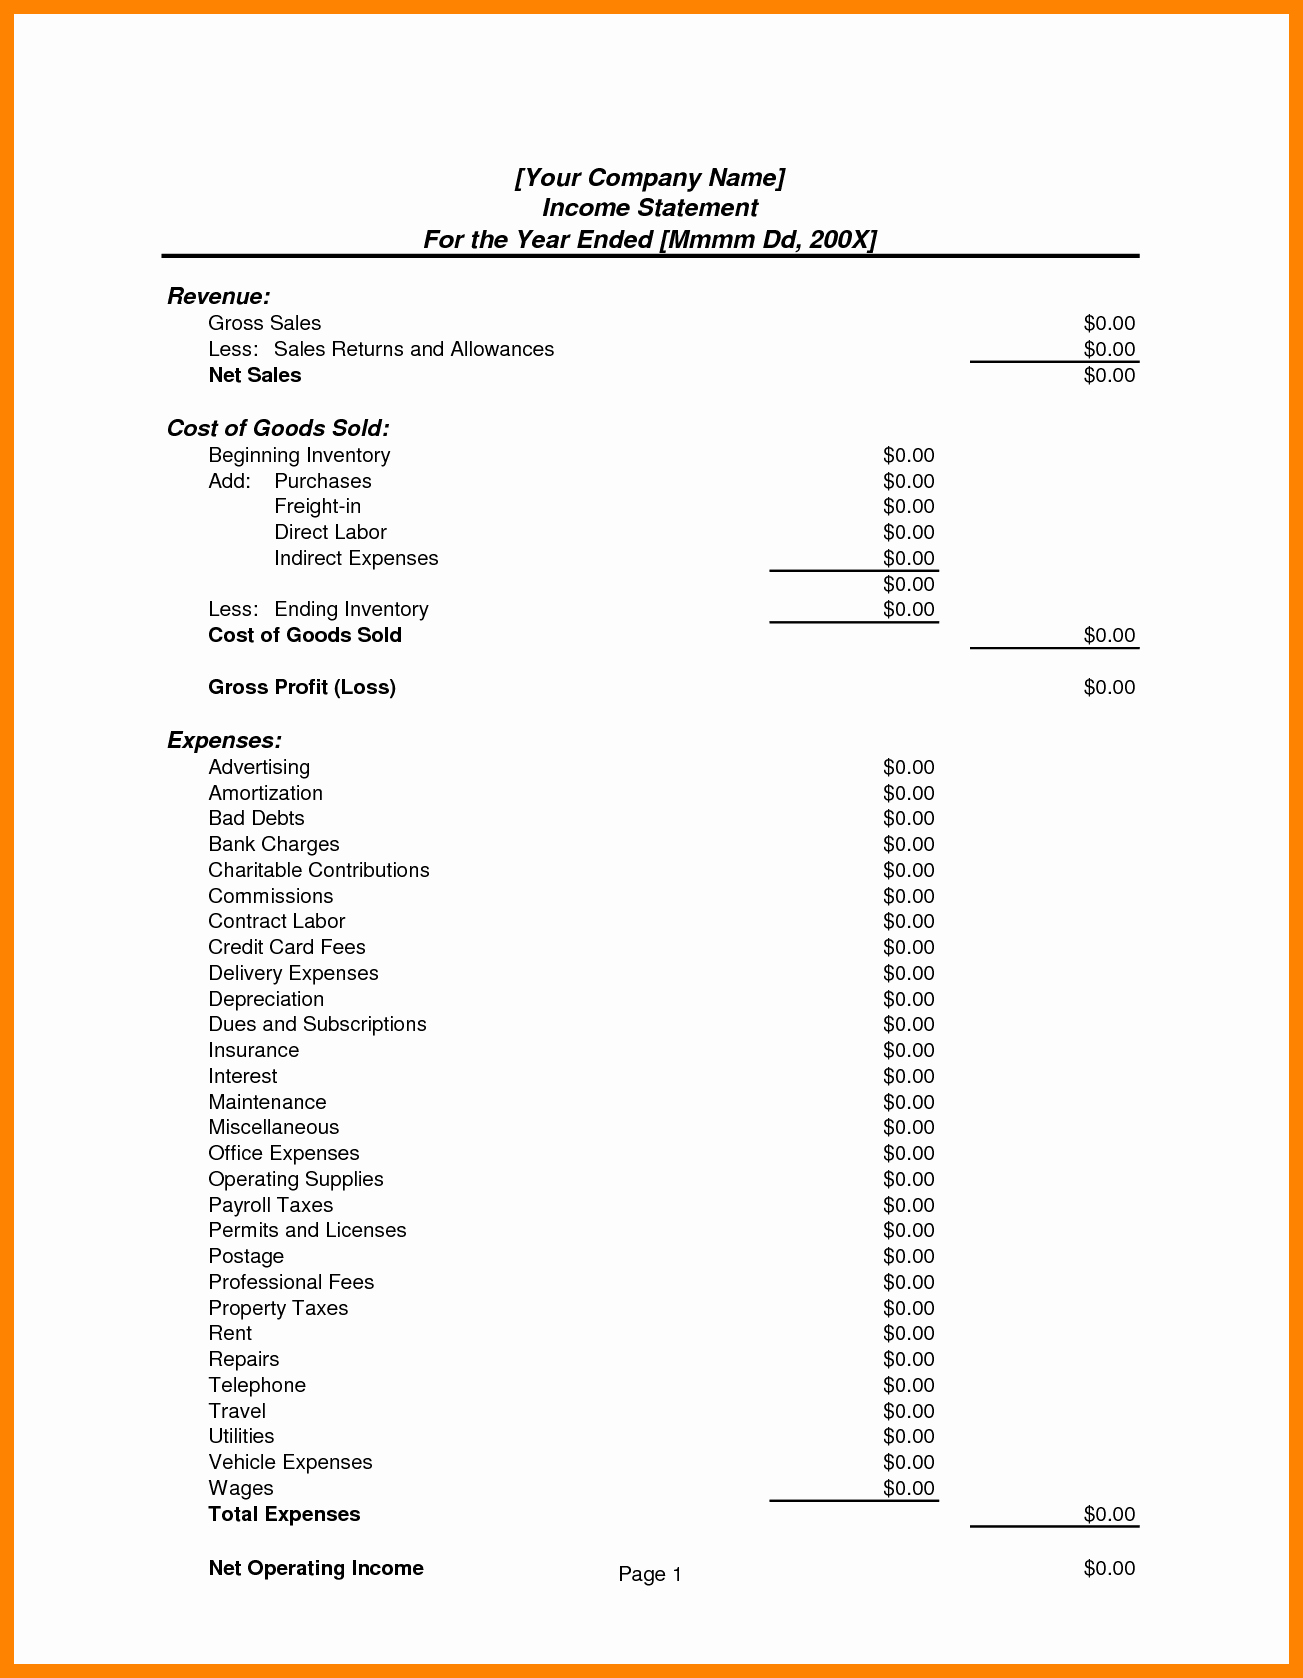 Business Income Statement Template Lovely 8 In E Statement format